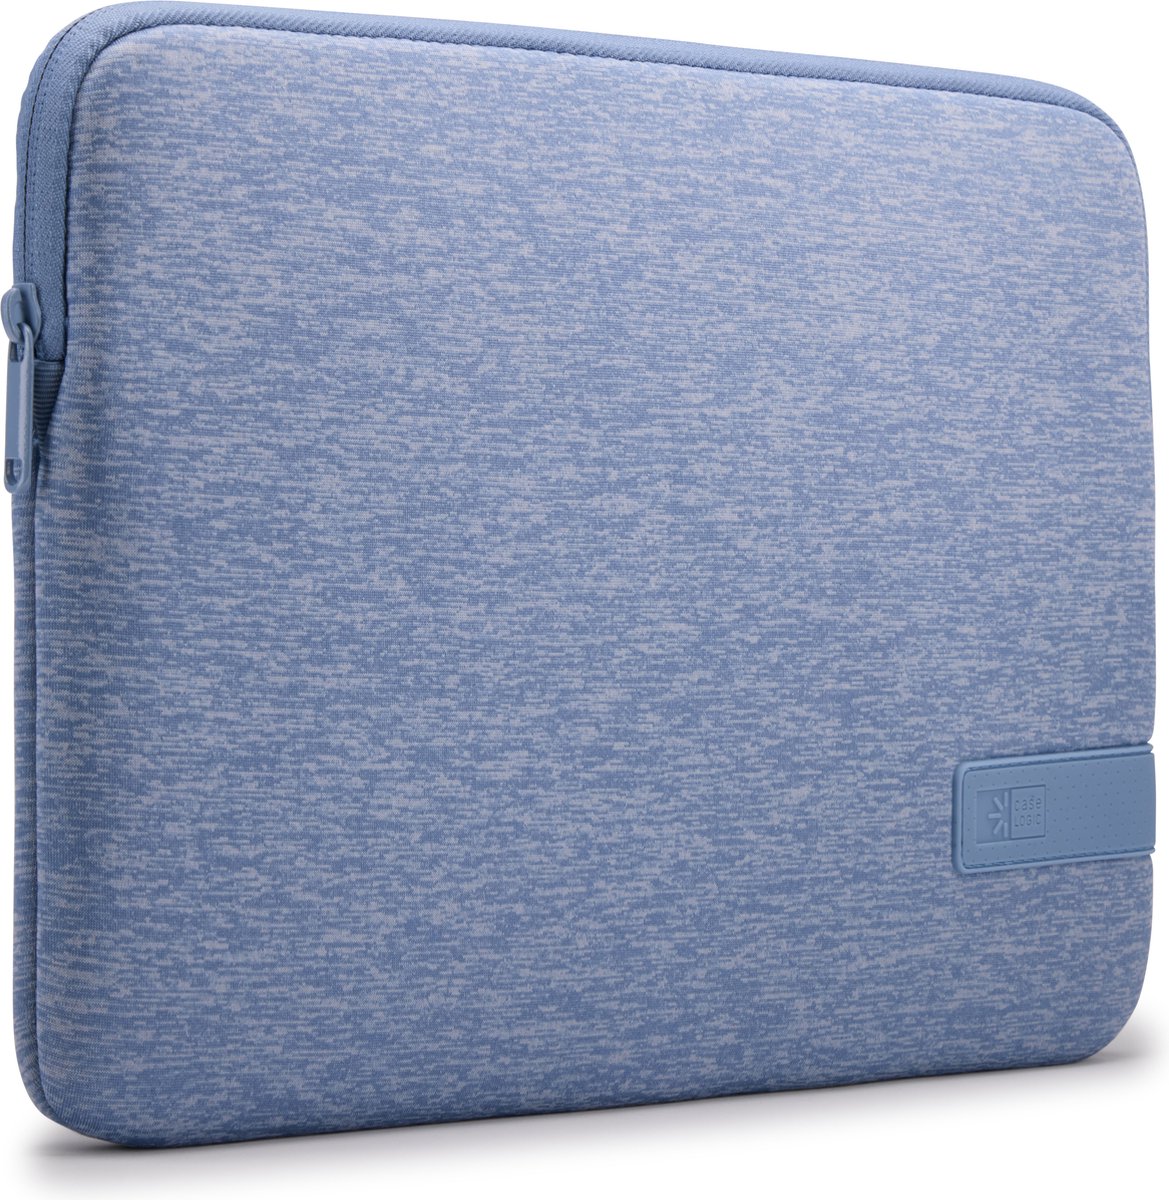 Case Logic REFMB113 - Laptophoes/ Sleeve - Macbook - 13 inch - Skyswell Blue